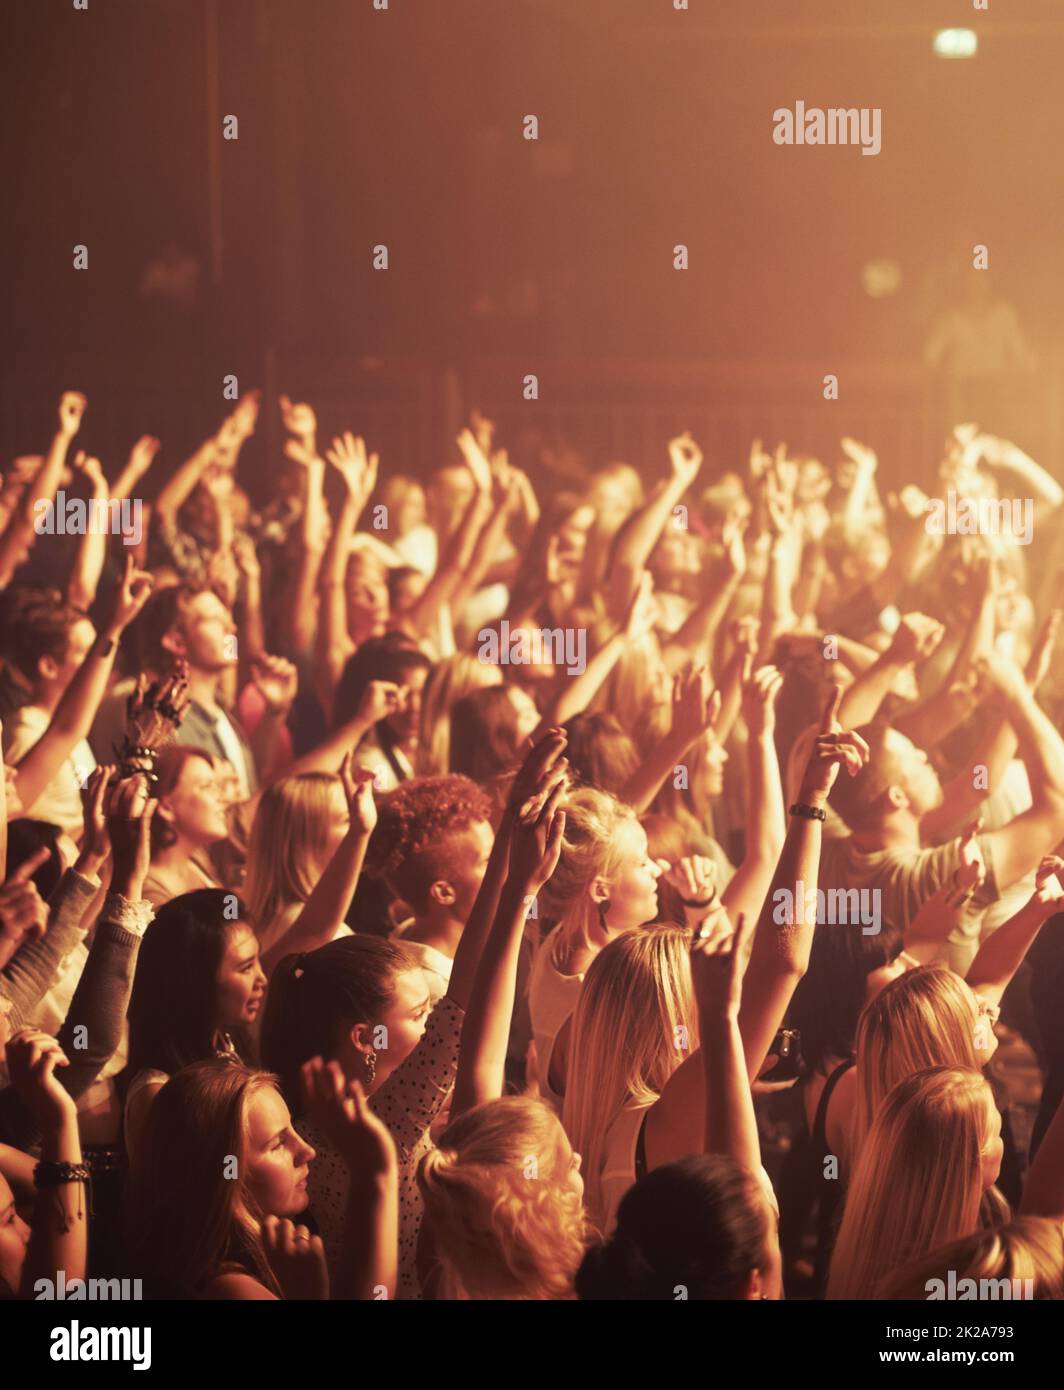 The most epic show of their lives. Adoring fans enjoying a music concert. Stock Photo